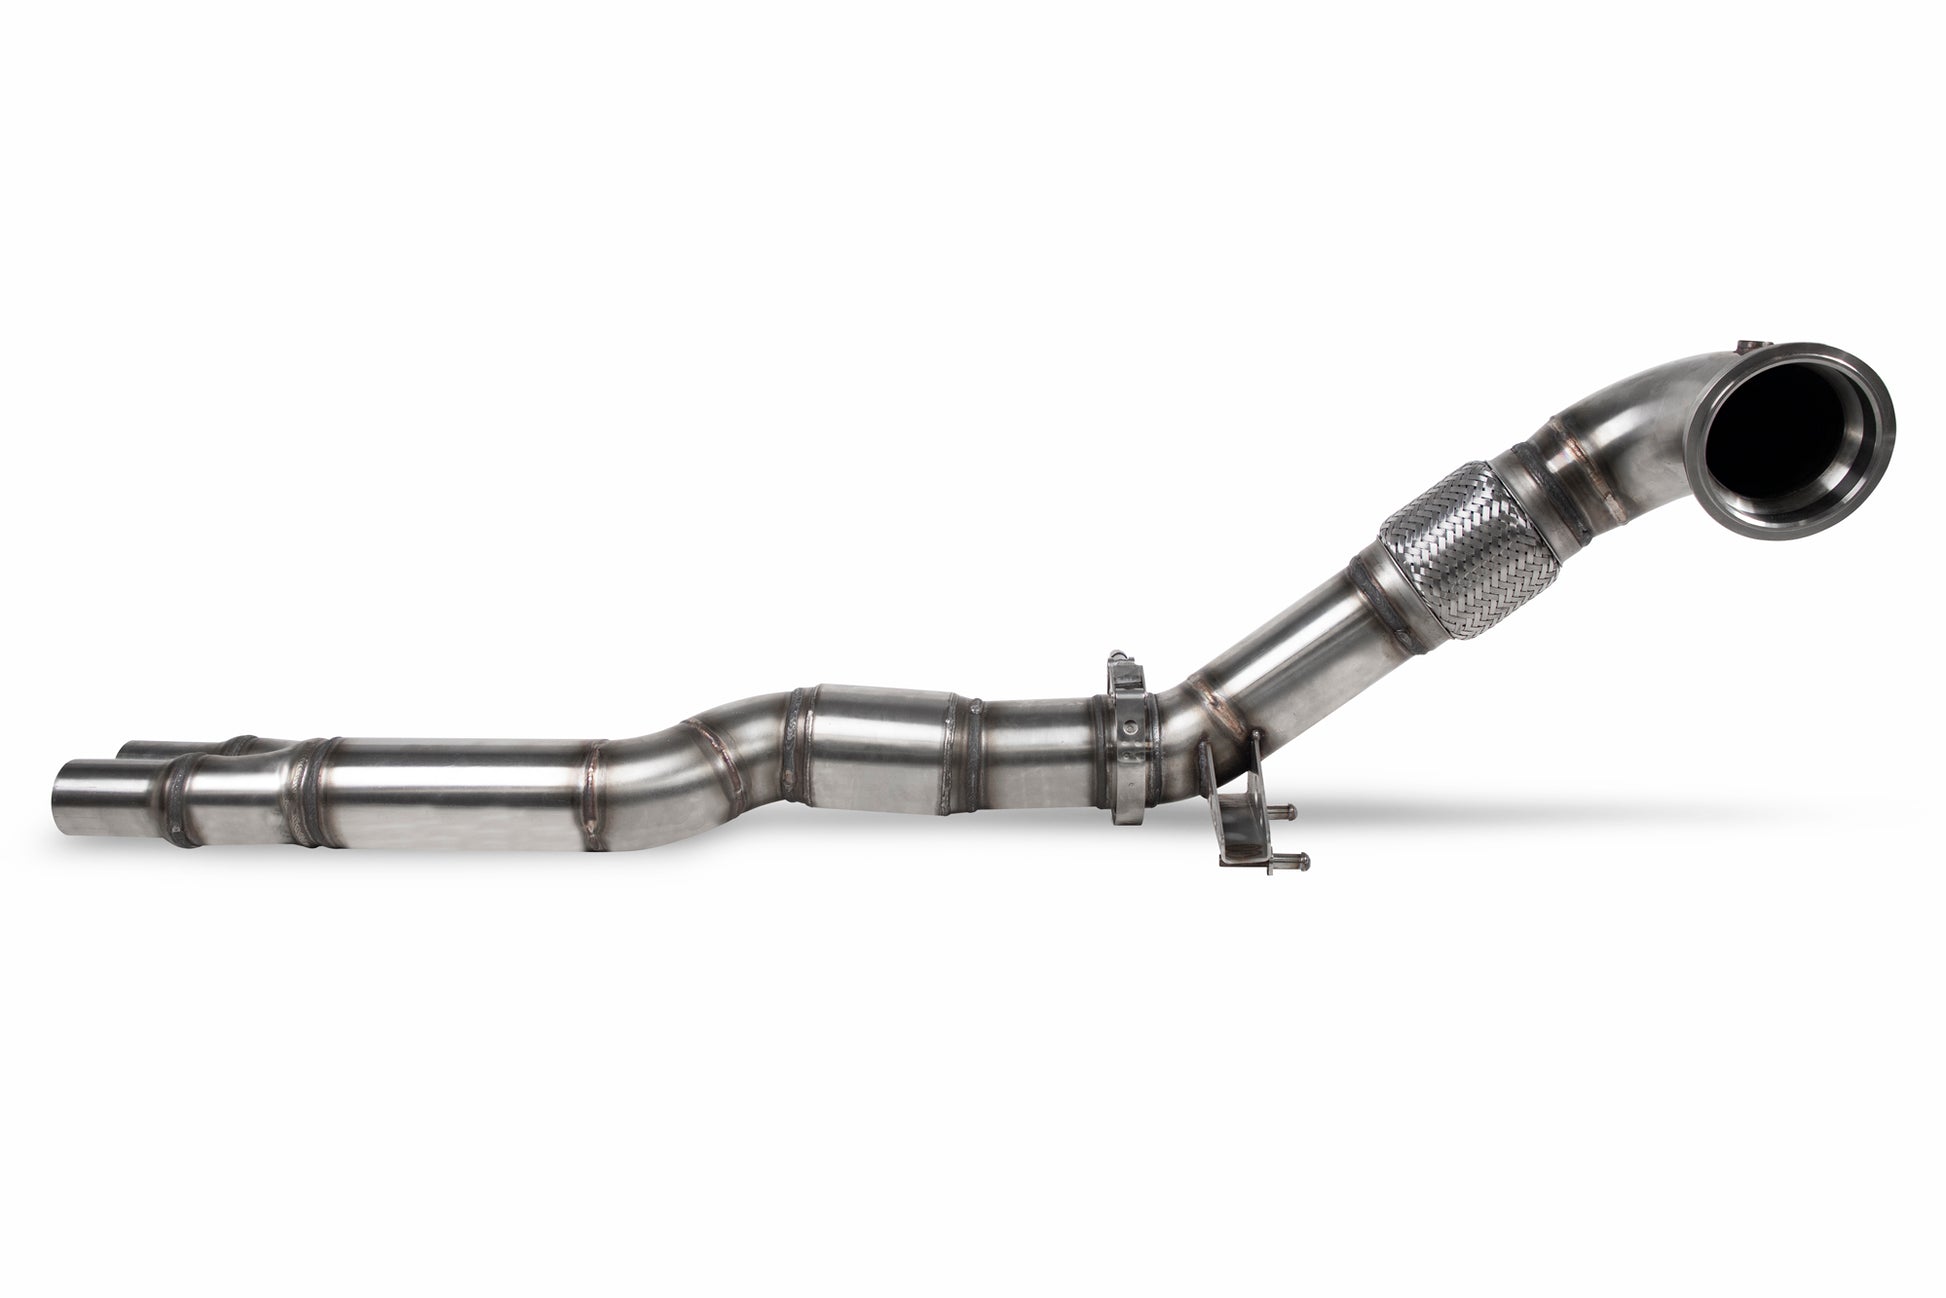 Scorpion Downpipe With A High Flow Sports Catalyst - Audi TT RS MK2